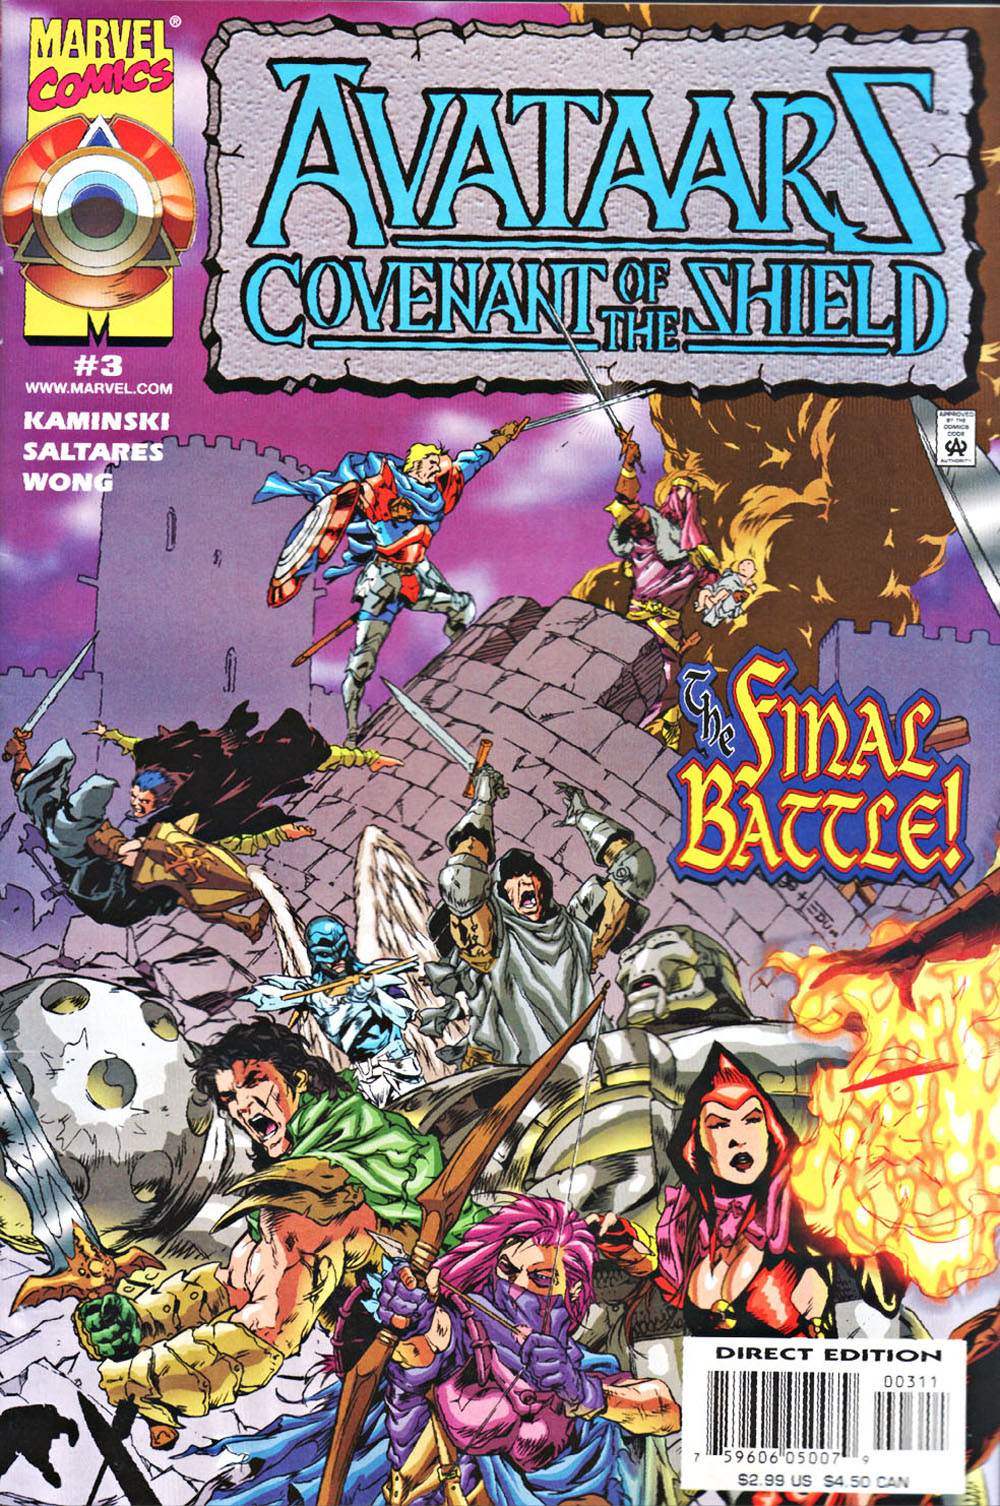 Read online Avataars: Covenant of the Shield comic -  Issue #3 - 1